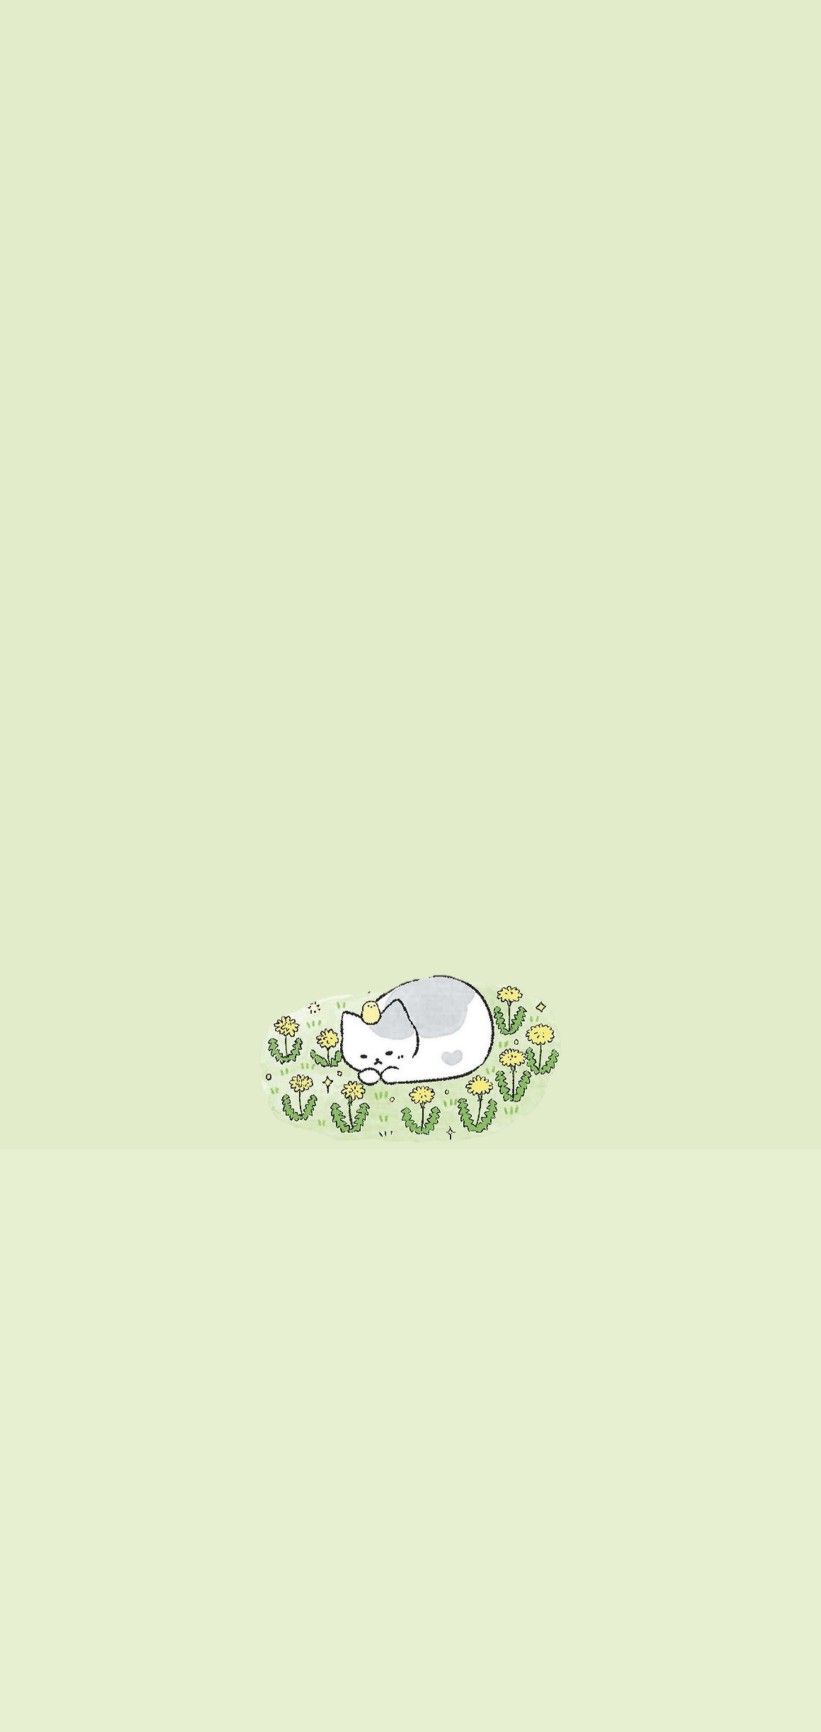 IPhone wallpaper of a white cat sleeping in a field of flowers - Pastel green